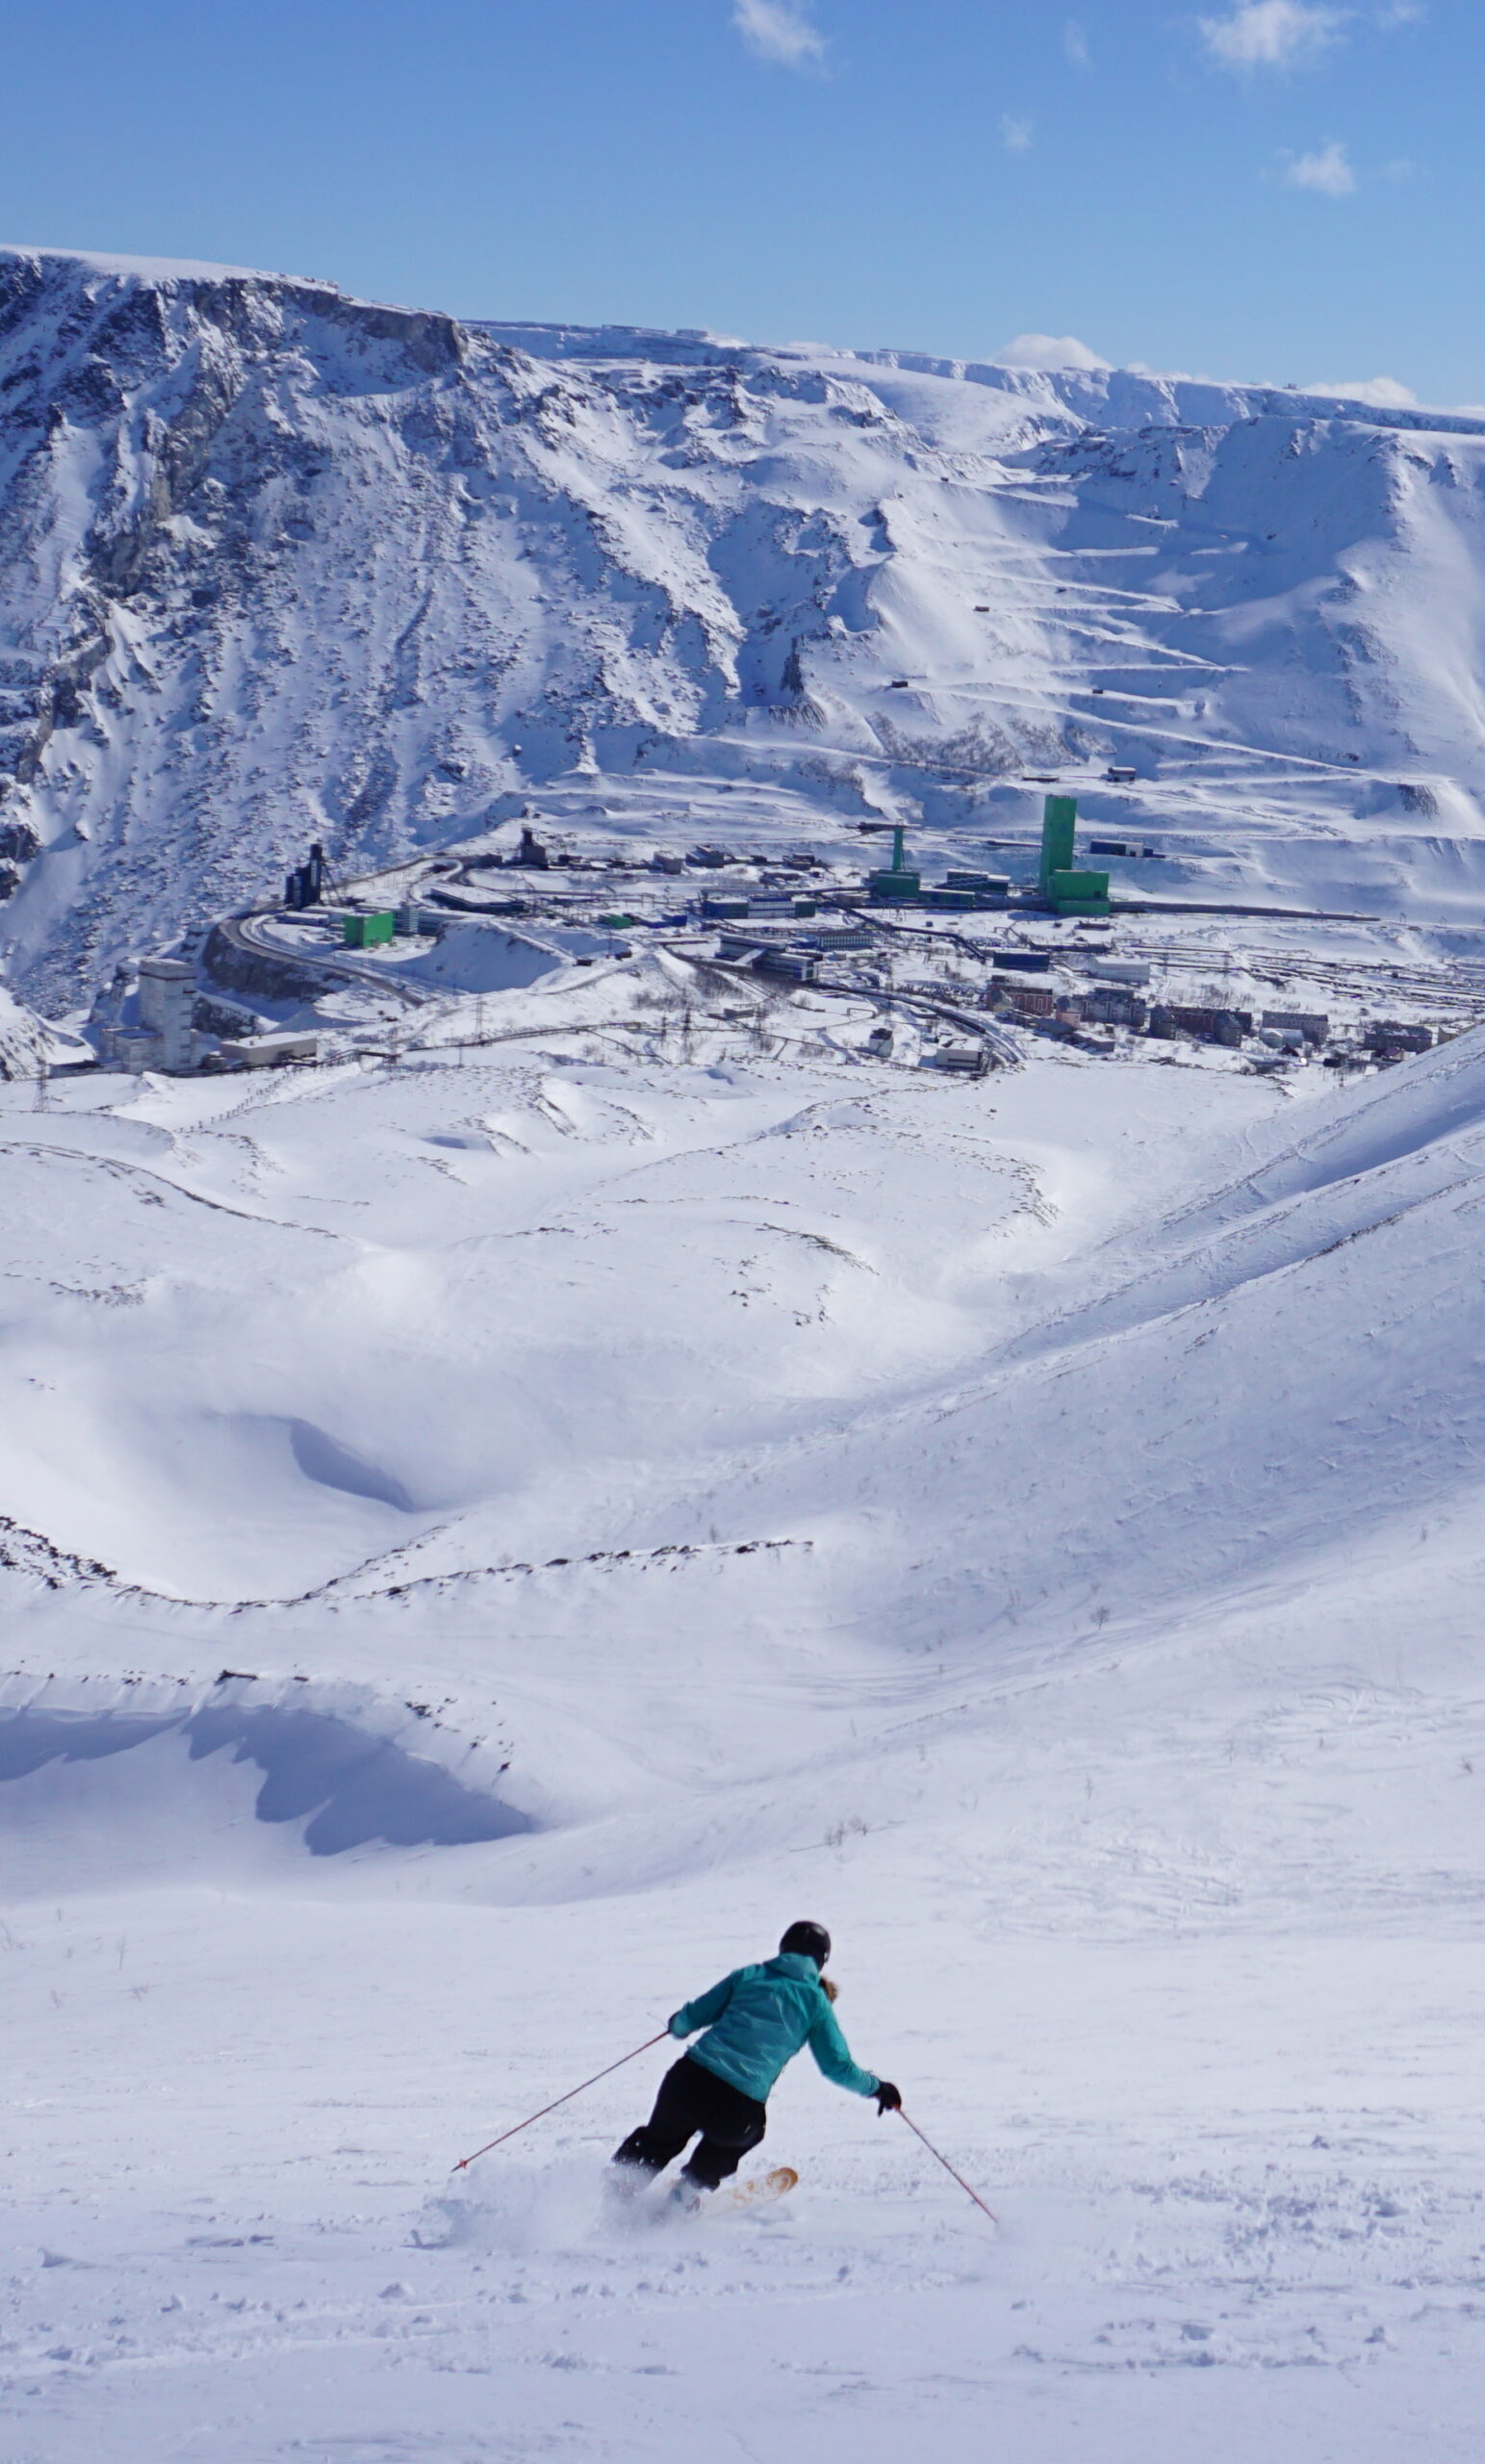 Skiing down the wide open slopes on Kukisvumchorr in the Khibiny Mountains of Russia